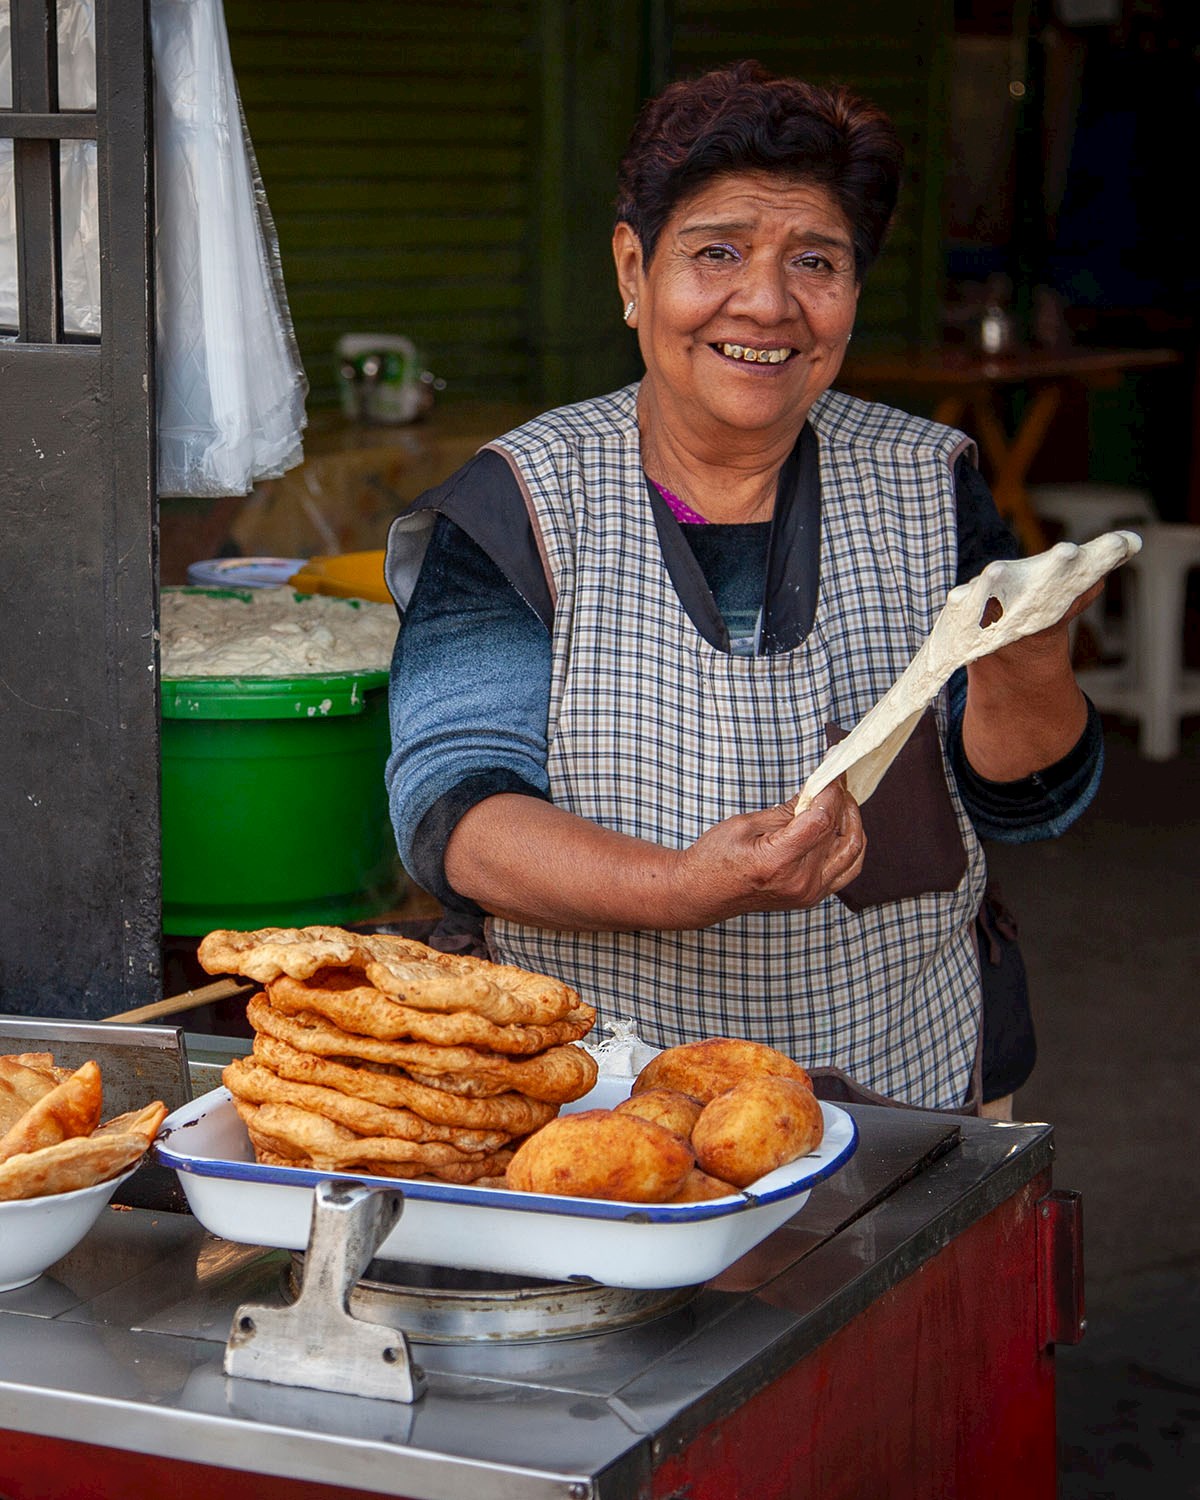 Open air street vendor selling scones and fried bread - 